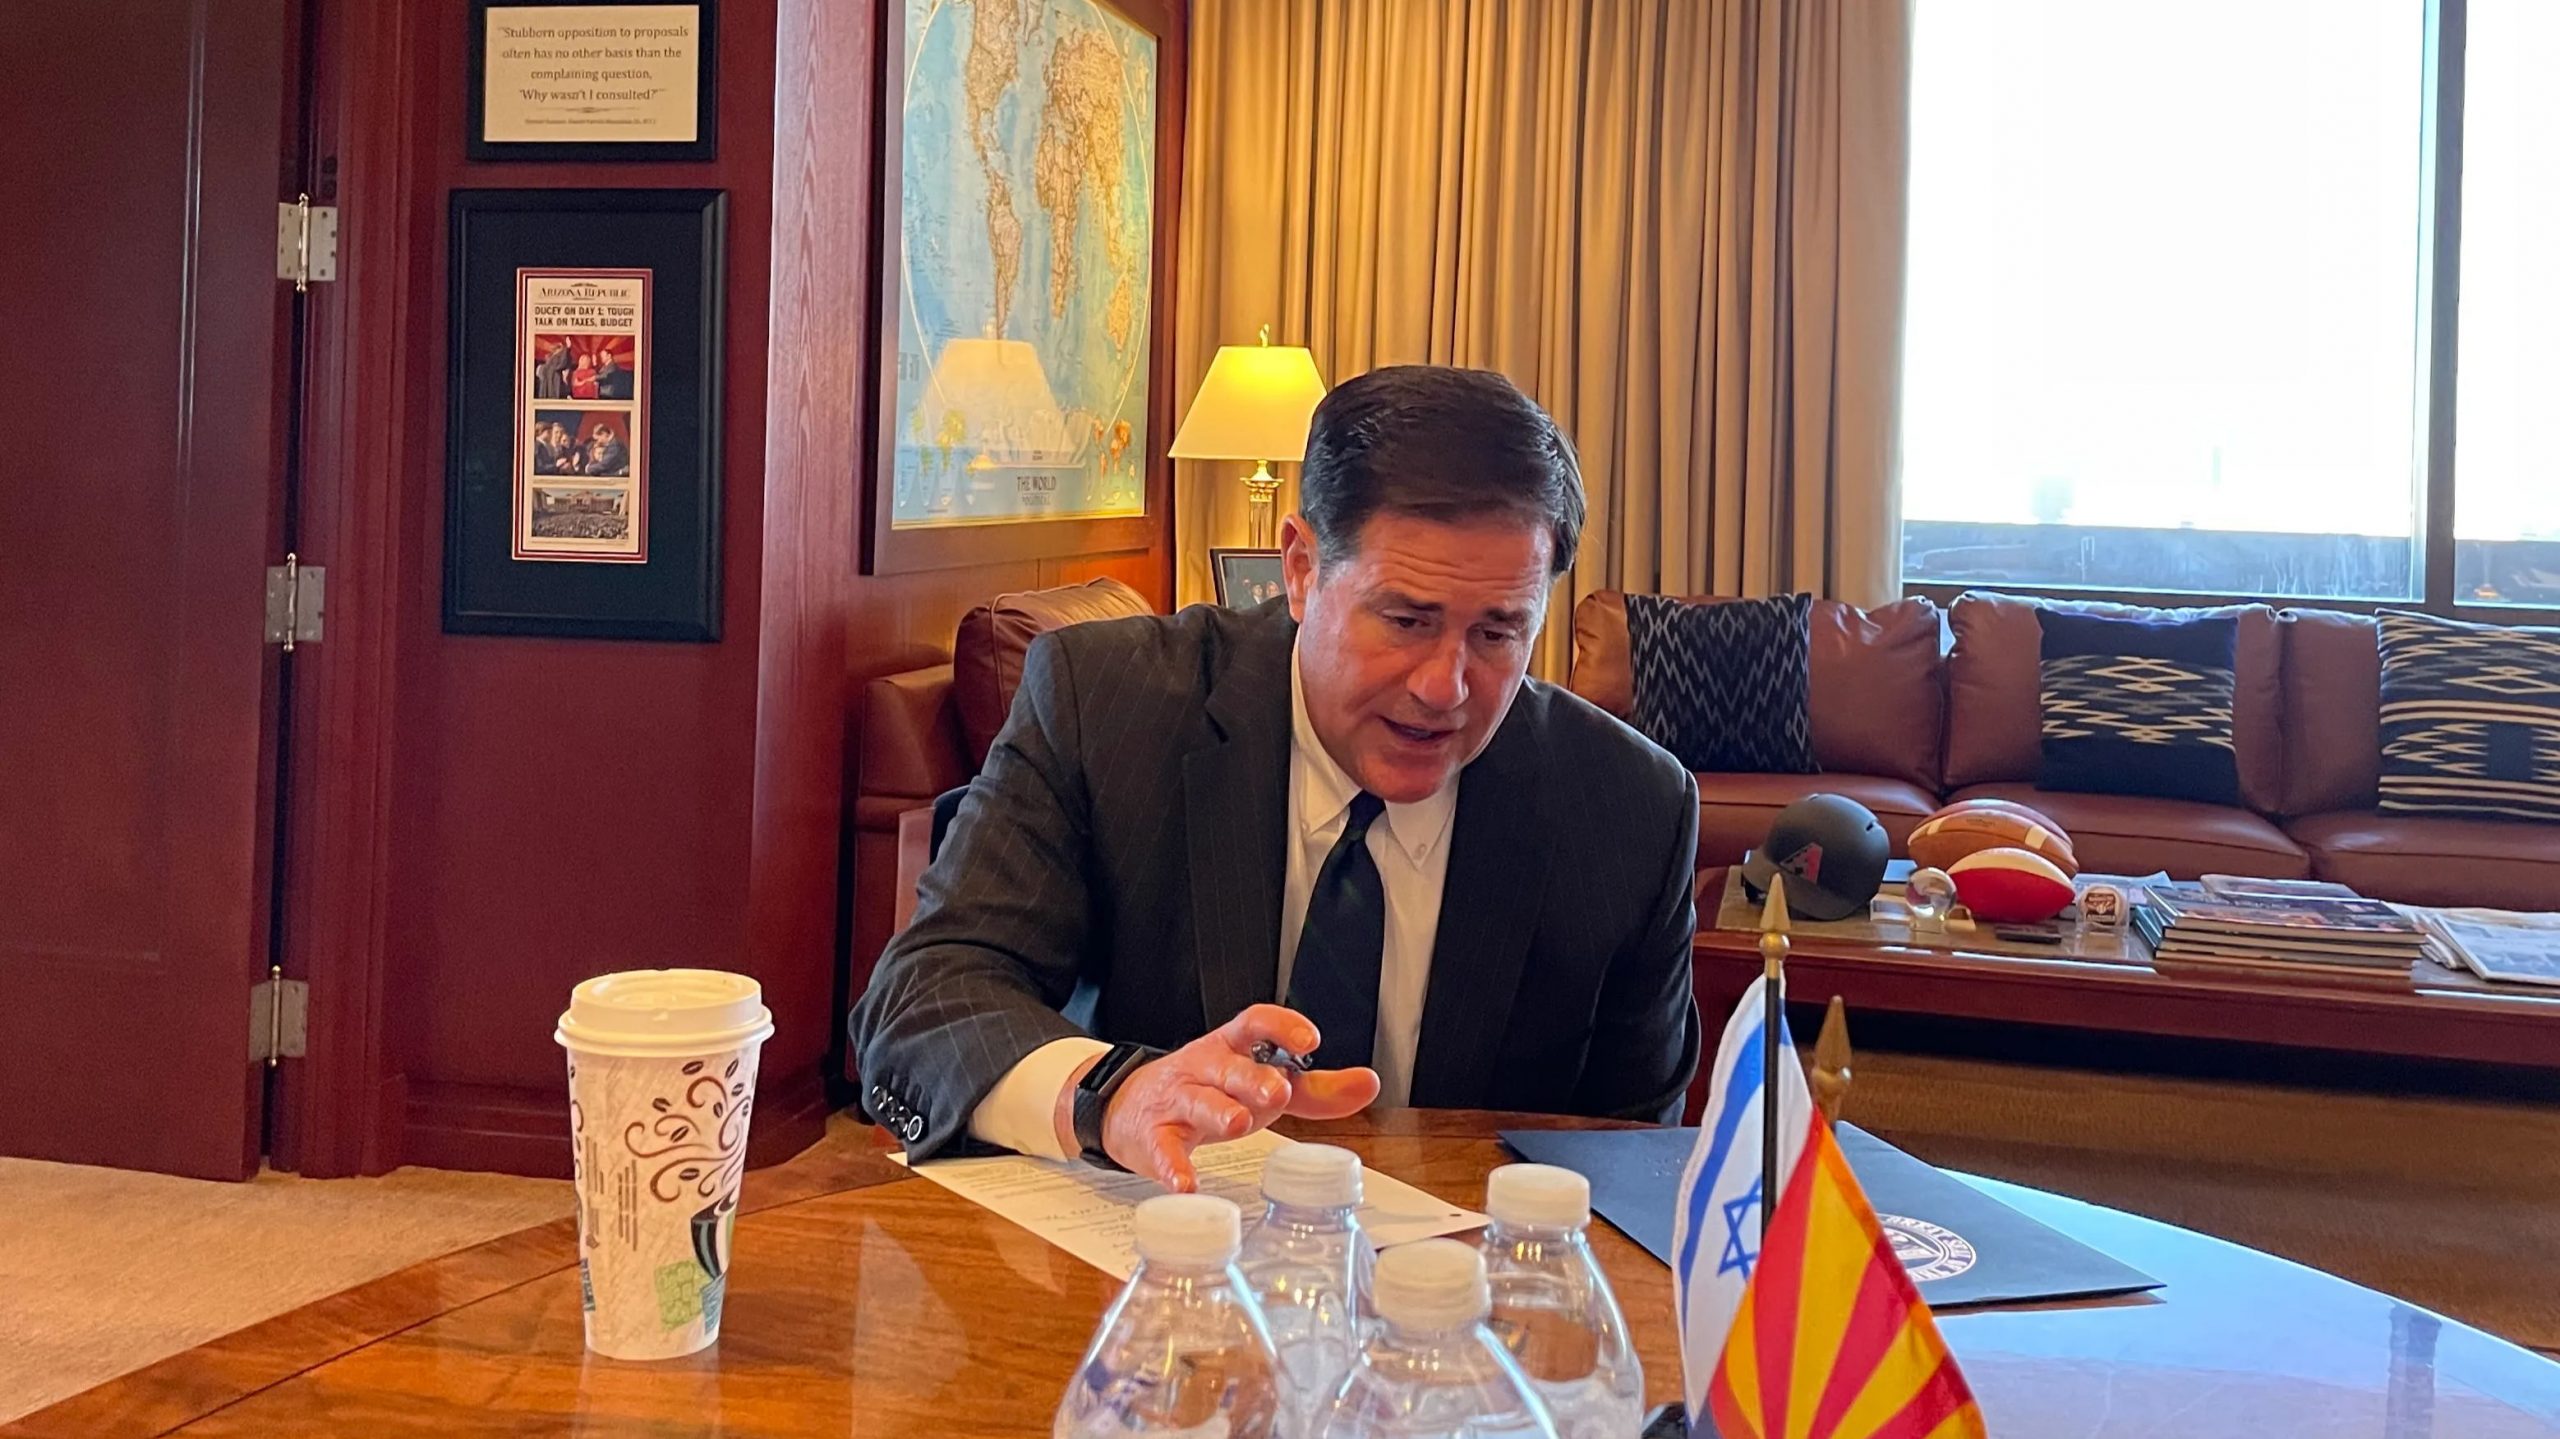 Arizona Gov. Doug Ducey issues executive order to reopen schools in-person by March 15